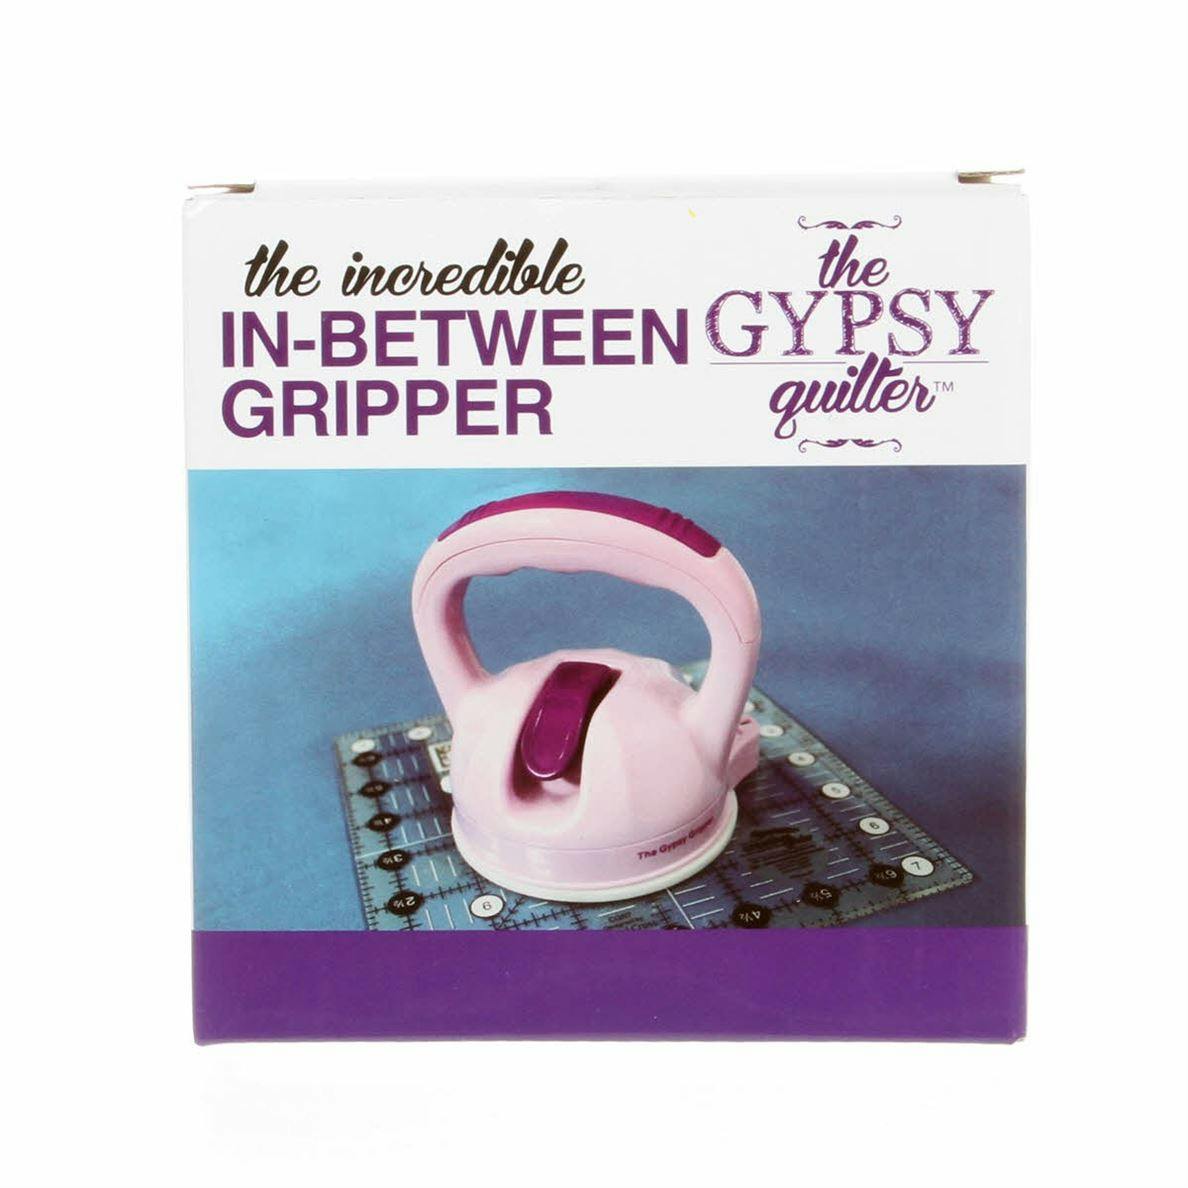 The Gypsy Quilter Incredible In-Between Gripper